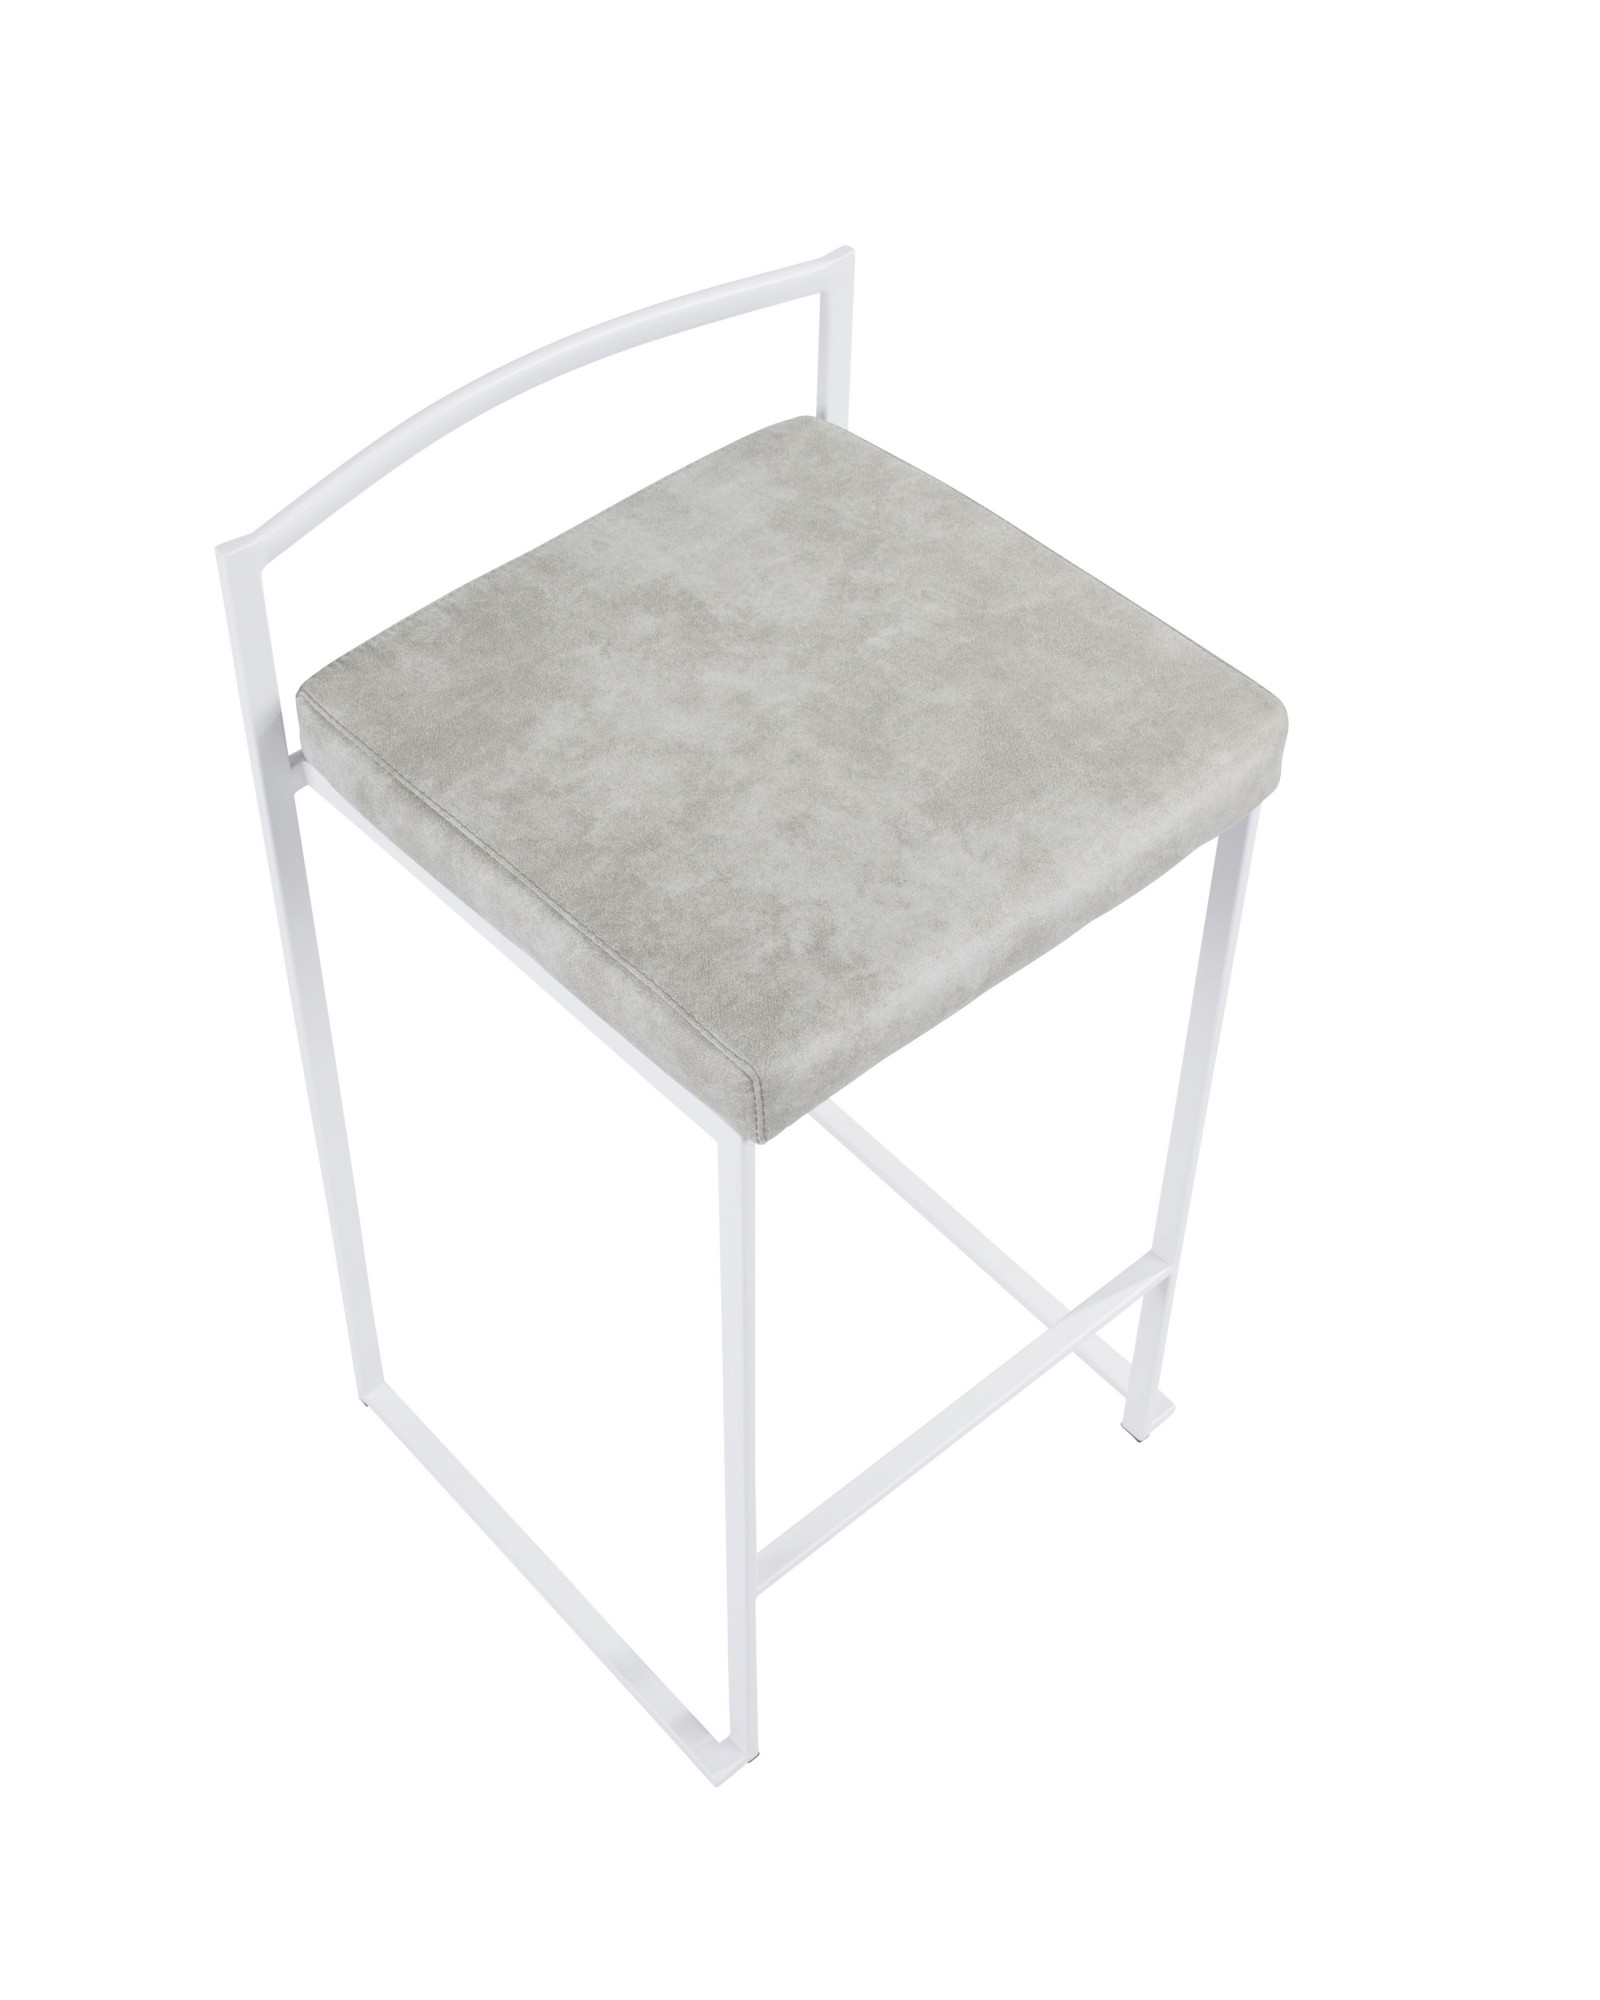 Fuji Contemporary Stackable Counter Stool in White with Light Grey Cowboy Fabric Cushion - Set of 2